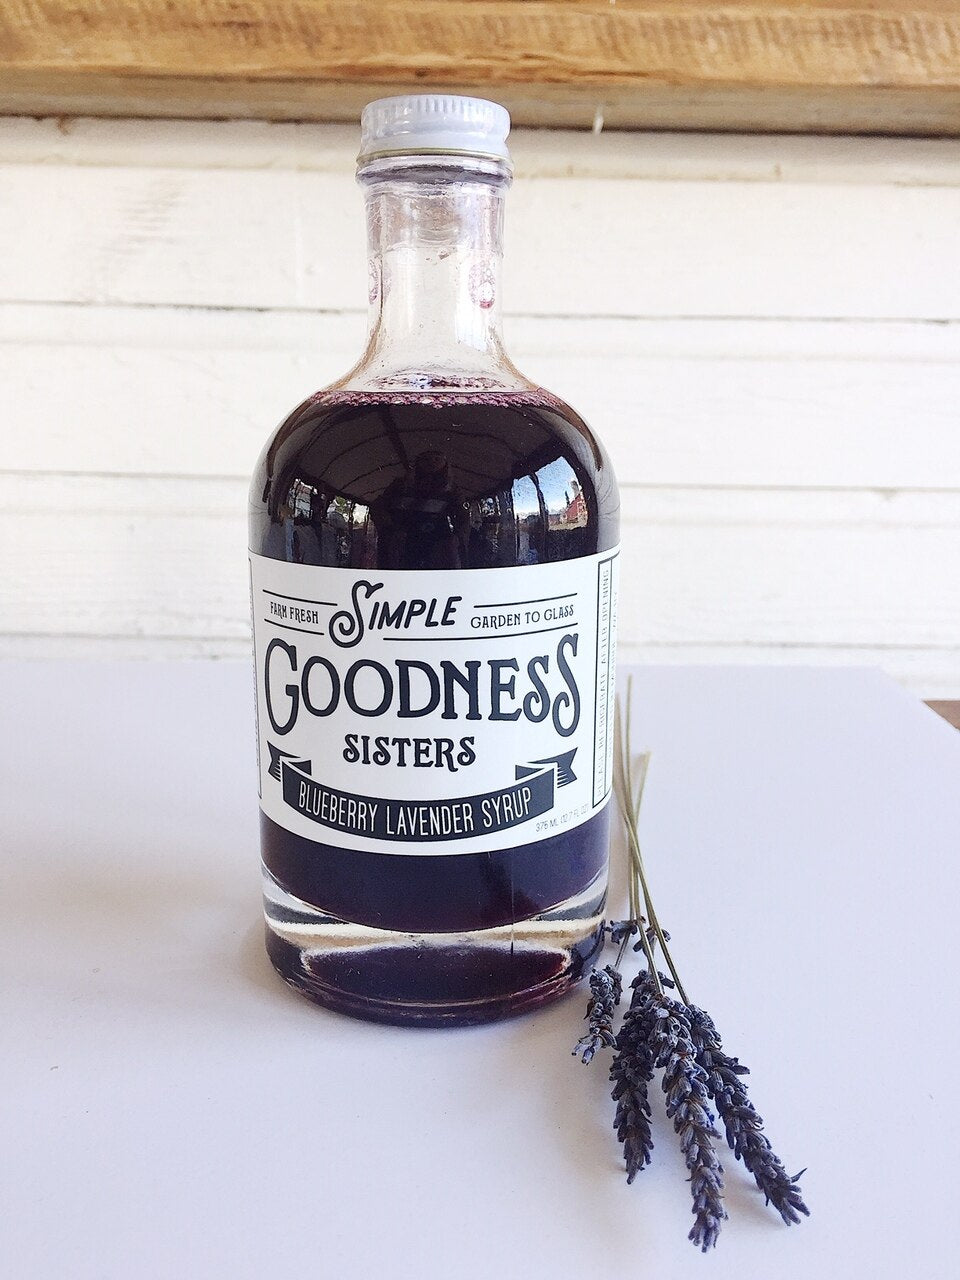 Blueberry Lavender Simple Goodness Sisters Syrup. Small batch , local farm goods. 